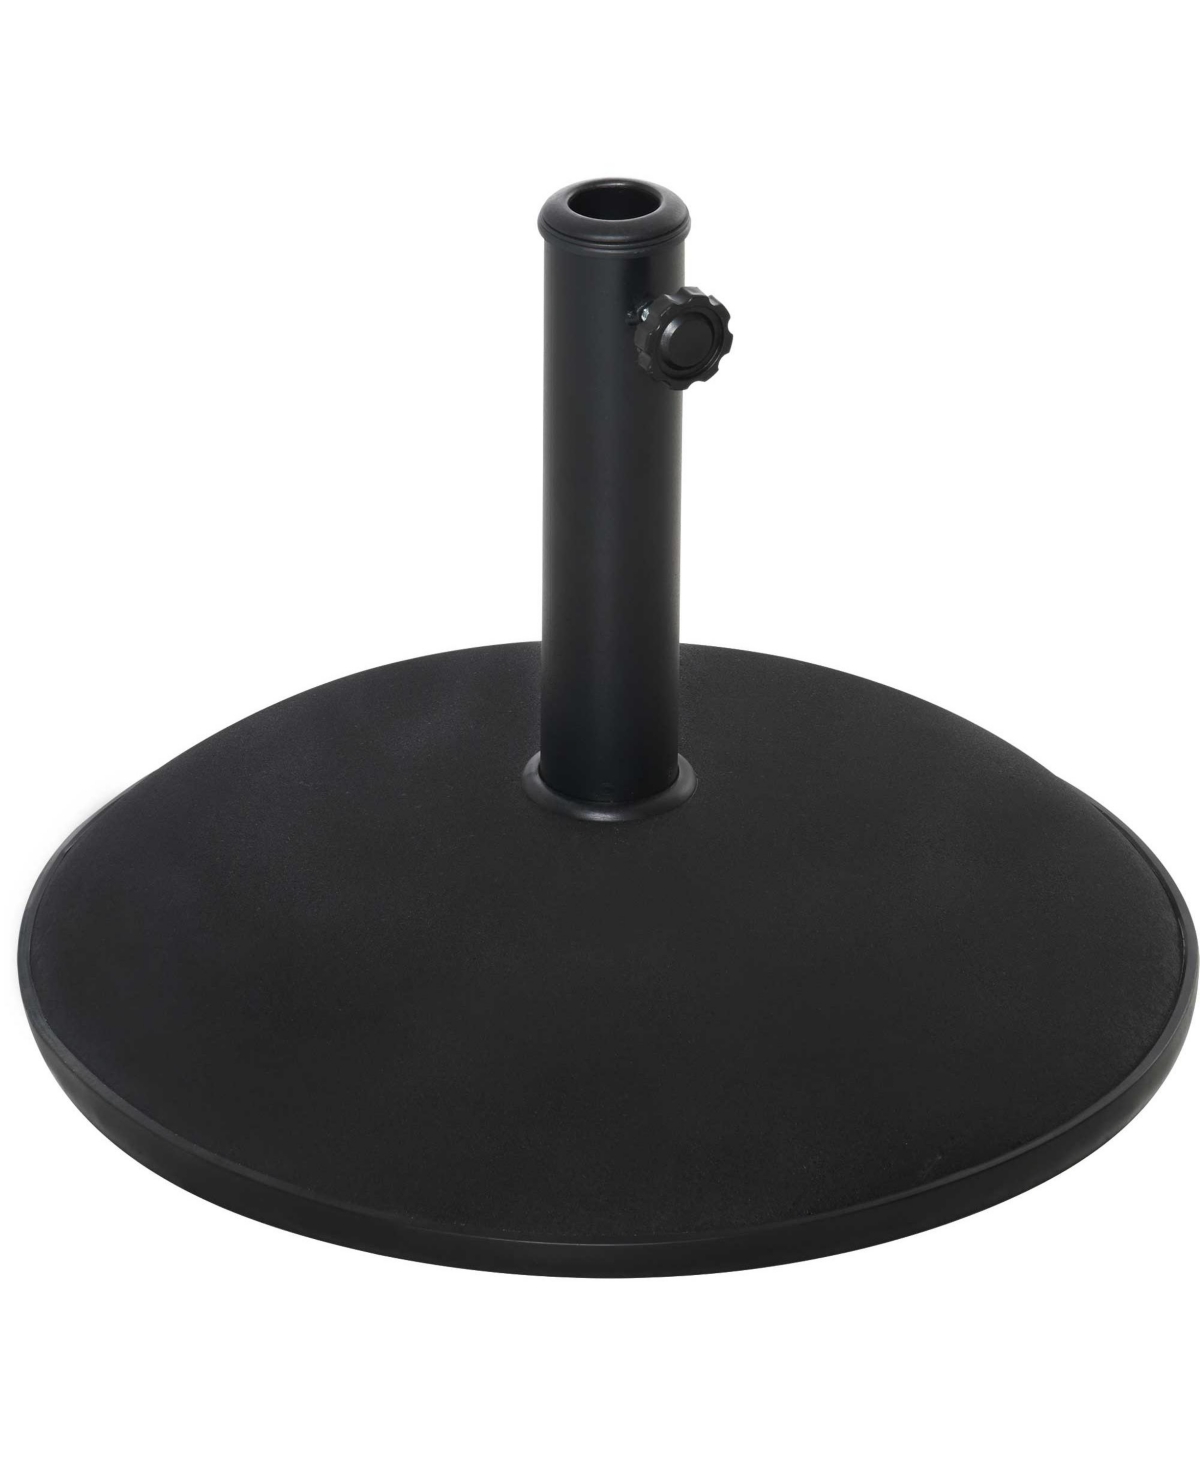 20" 55 lbs Round Cement Umbrella Base Stand Market Parasol Holder with Tightening Knob & Easy Setup, for 1.3"Dia, 1.5"Dia, 1.9"Dia Pole, for